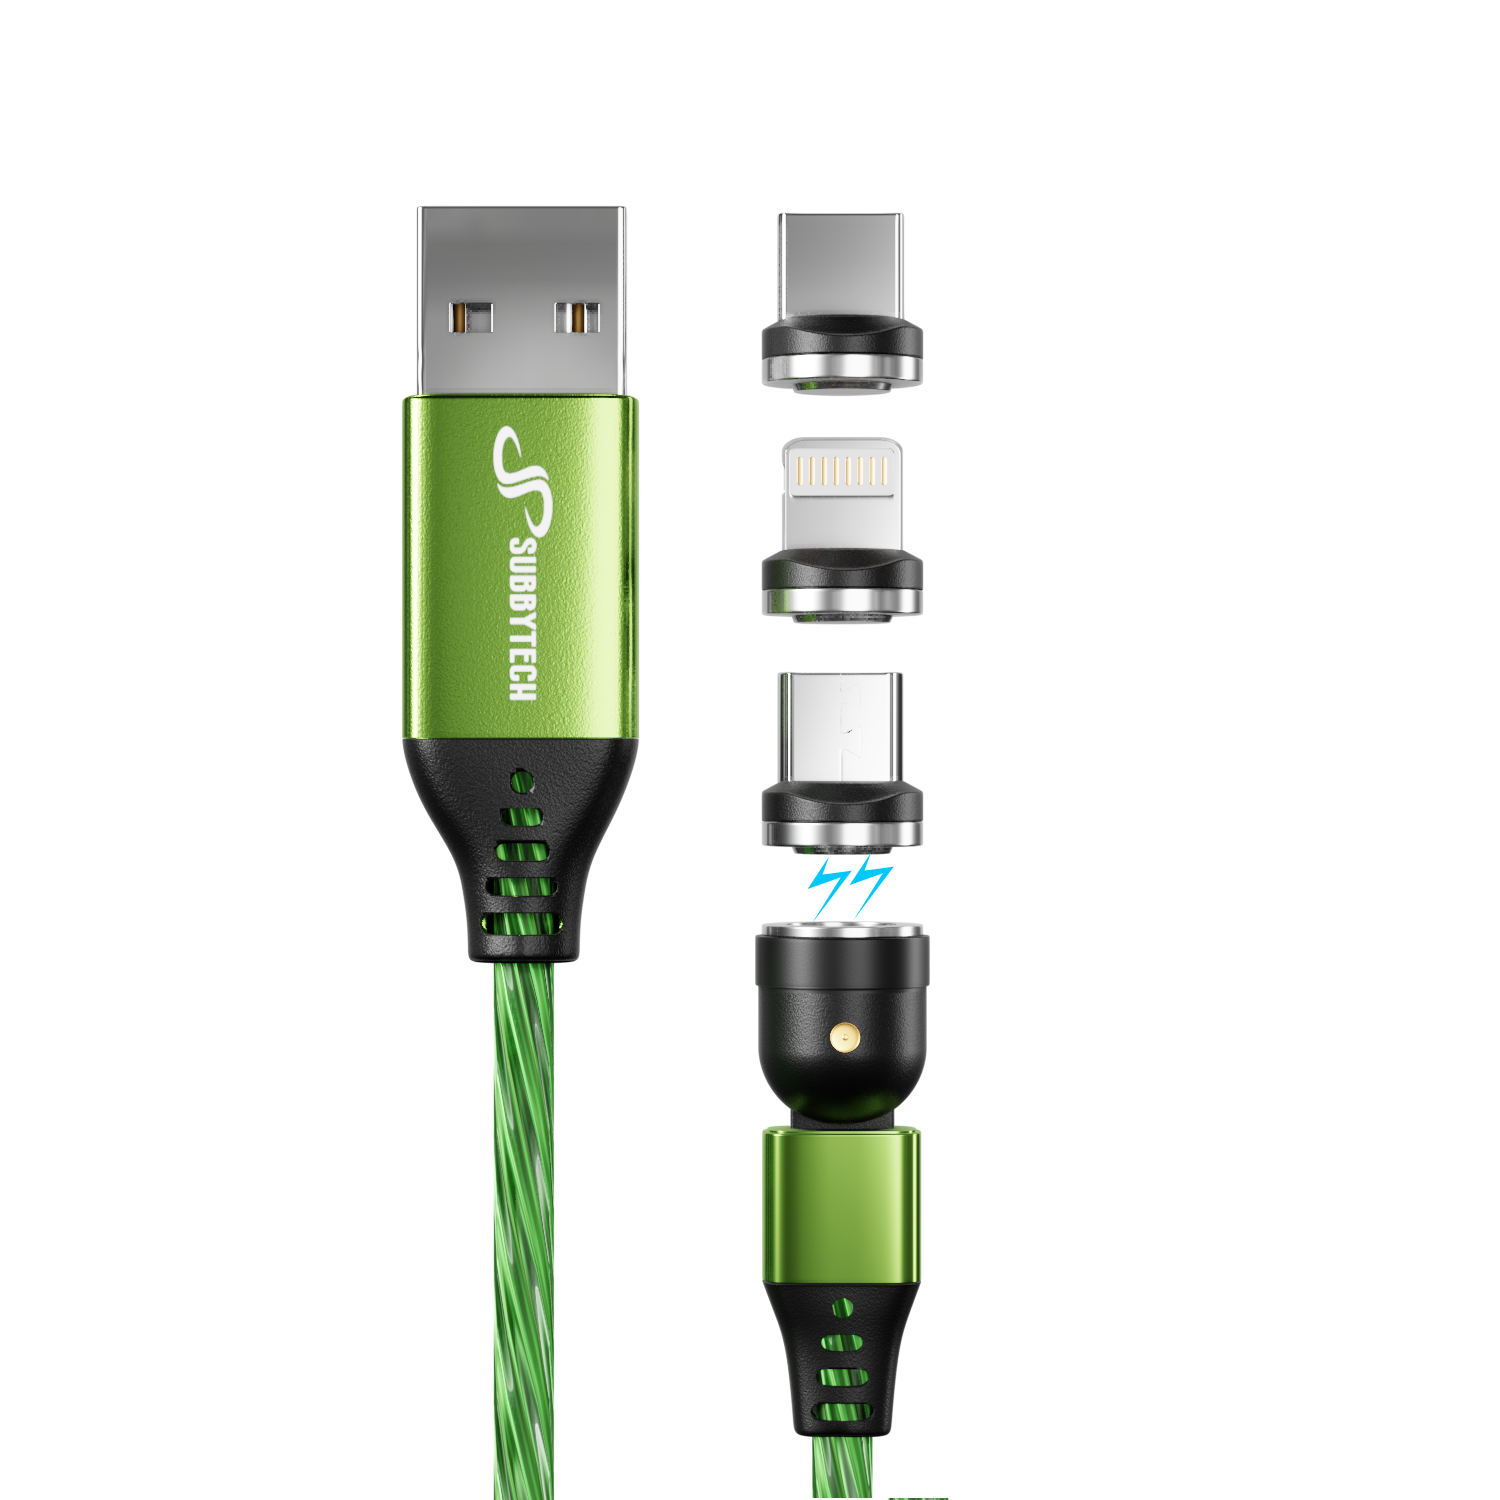 CliX light up charging cables